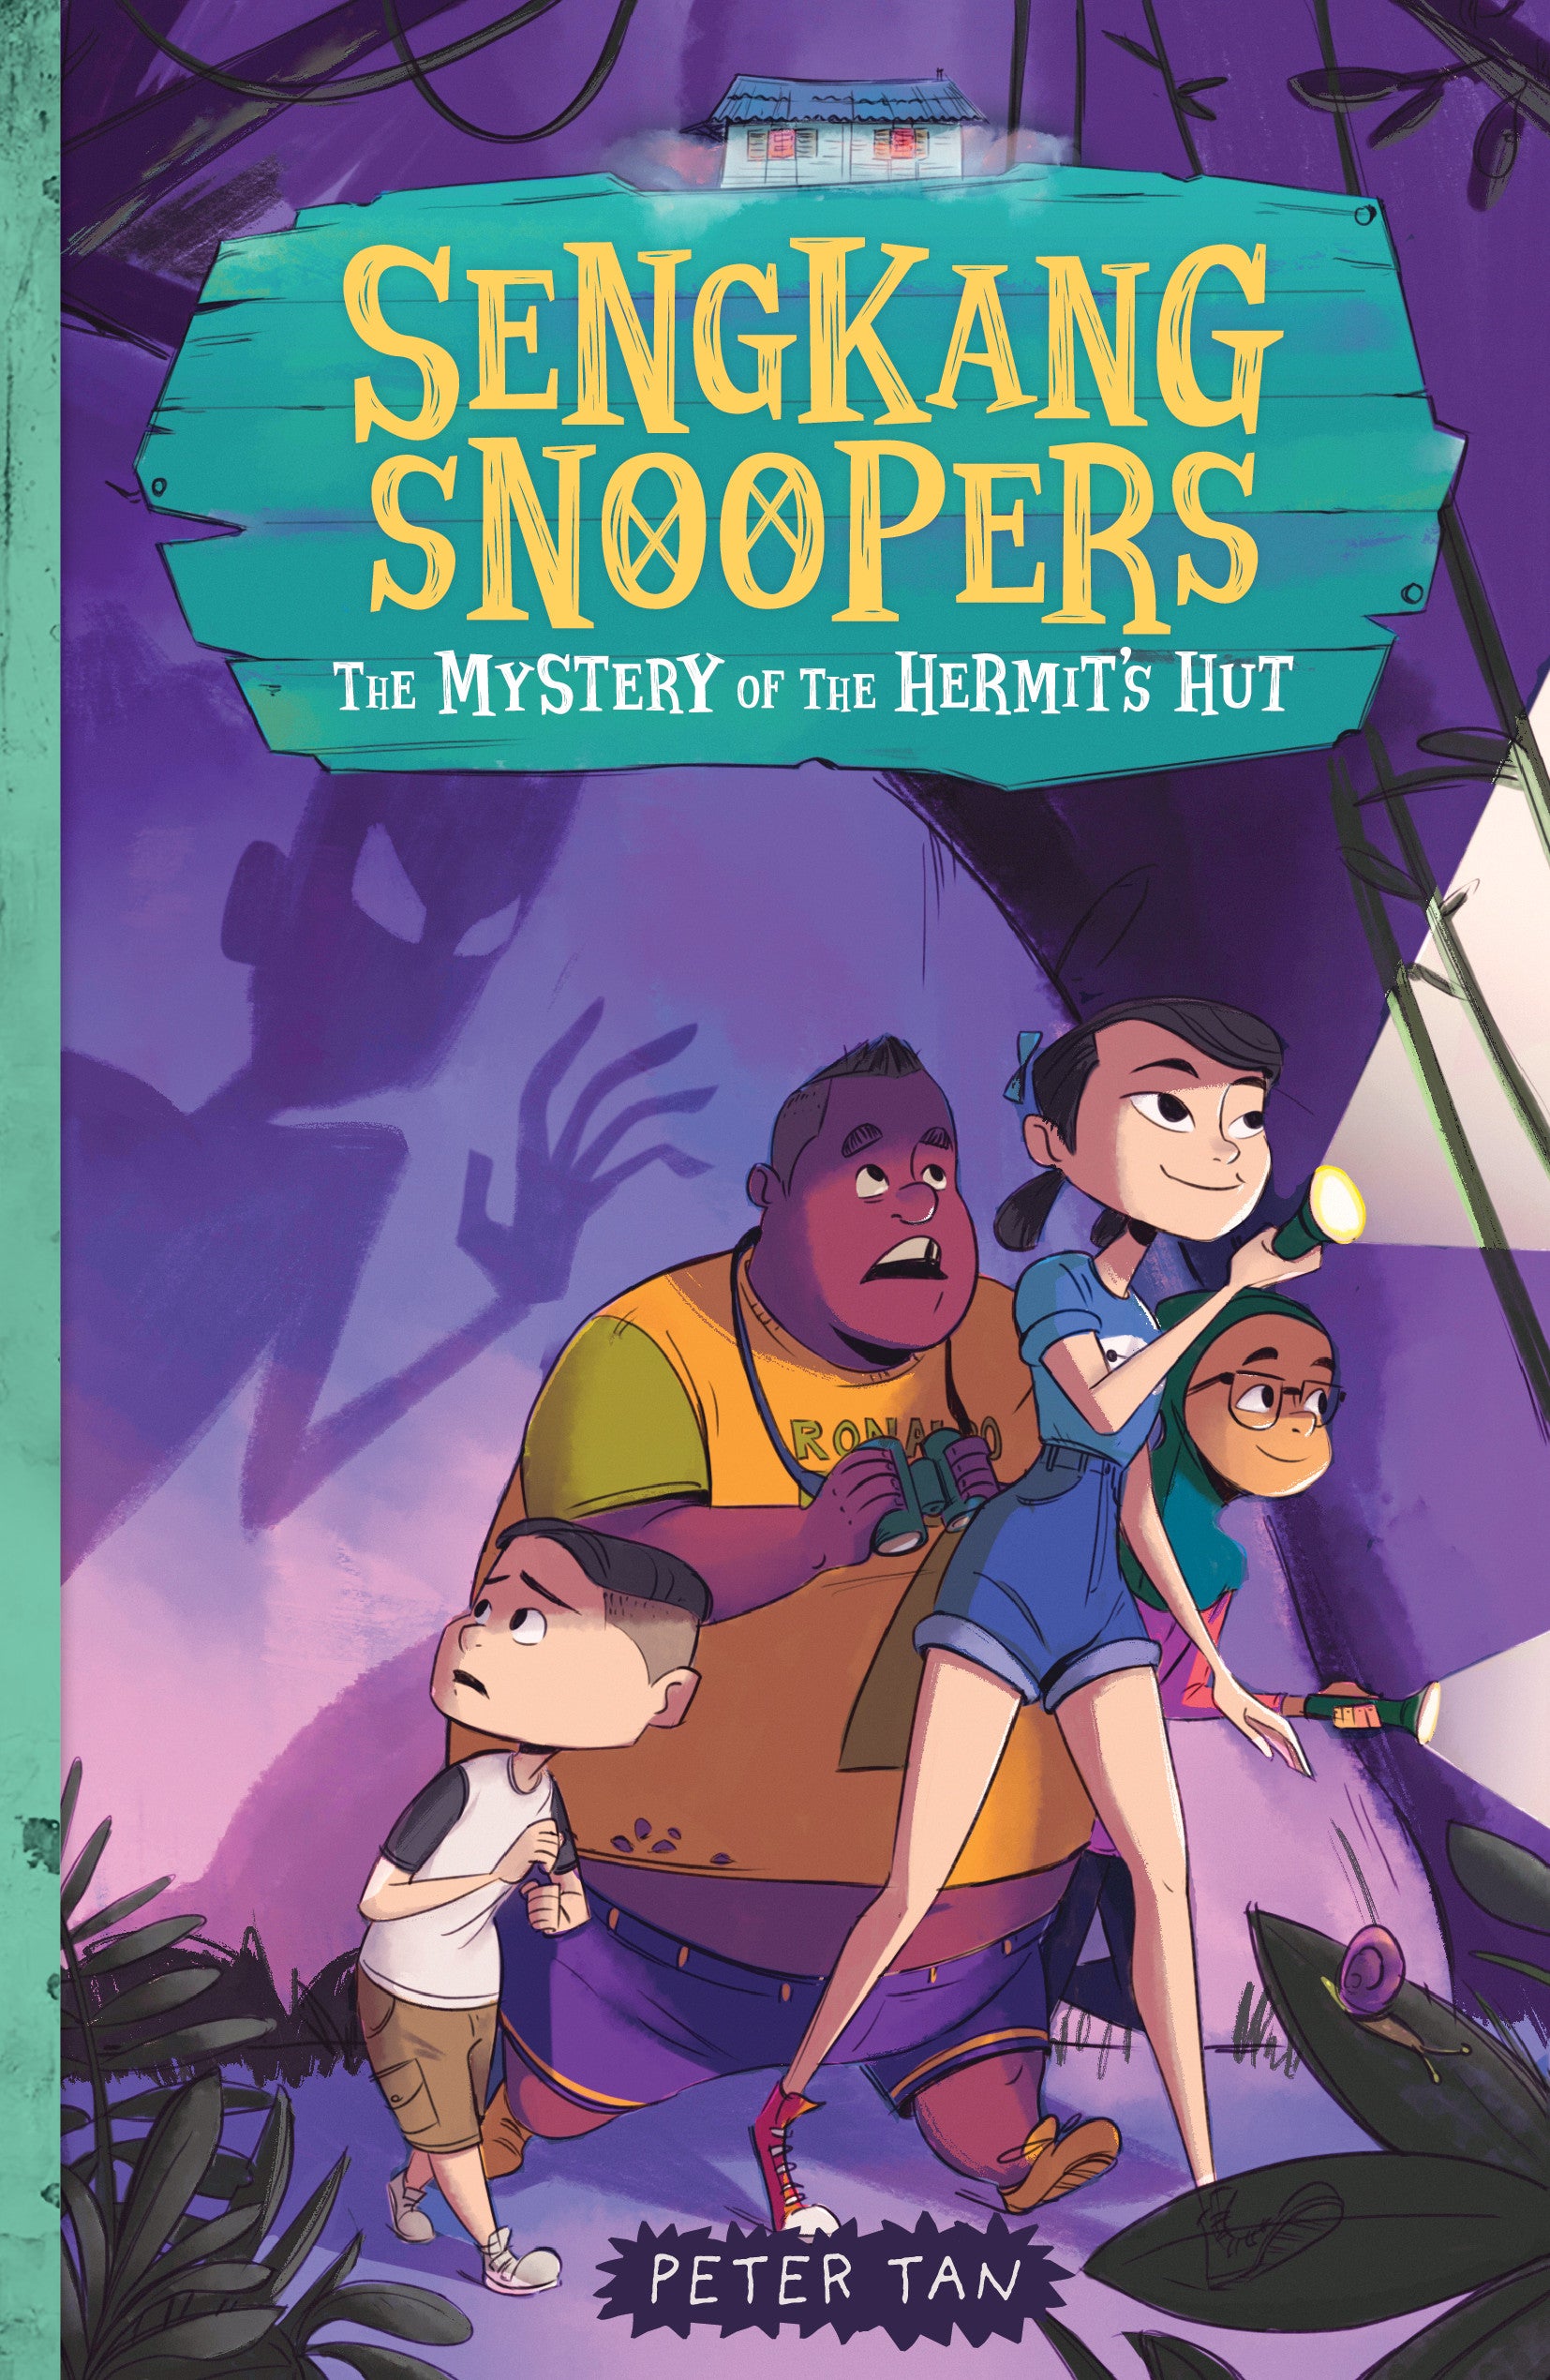 Sengkang Snoopers: The Mystery of the Hermit's Hut (Book 1)